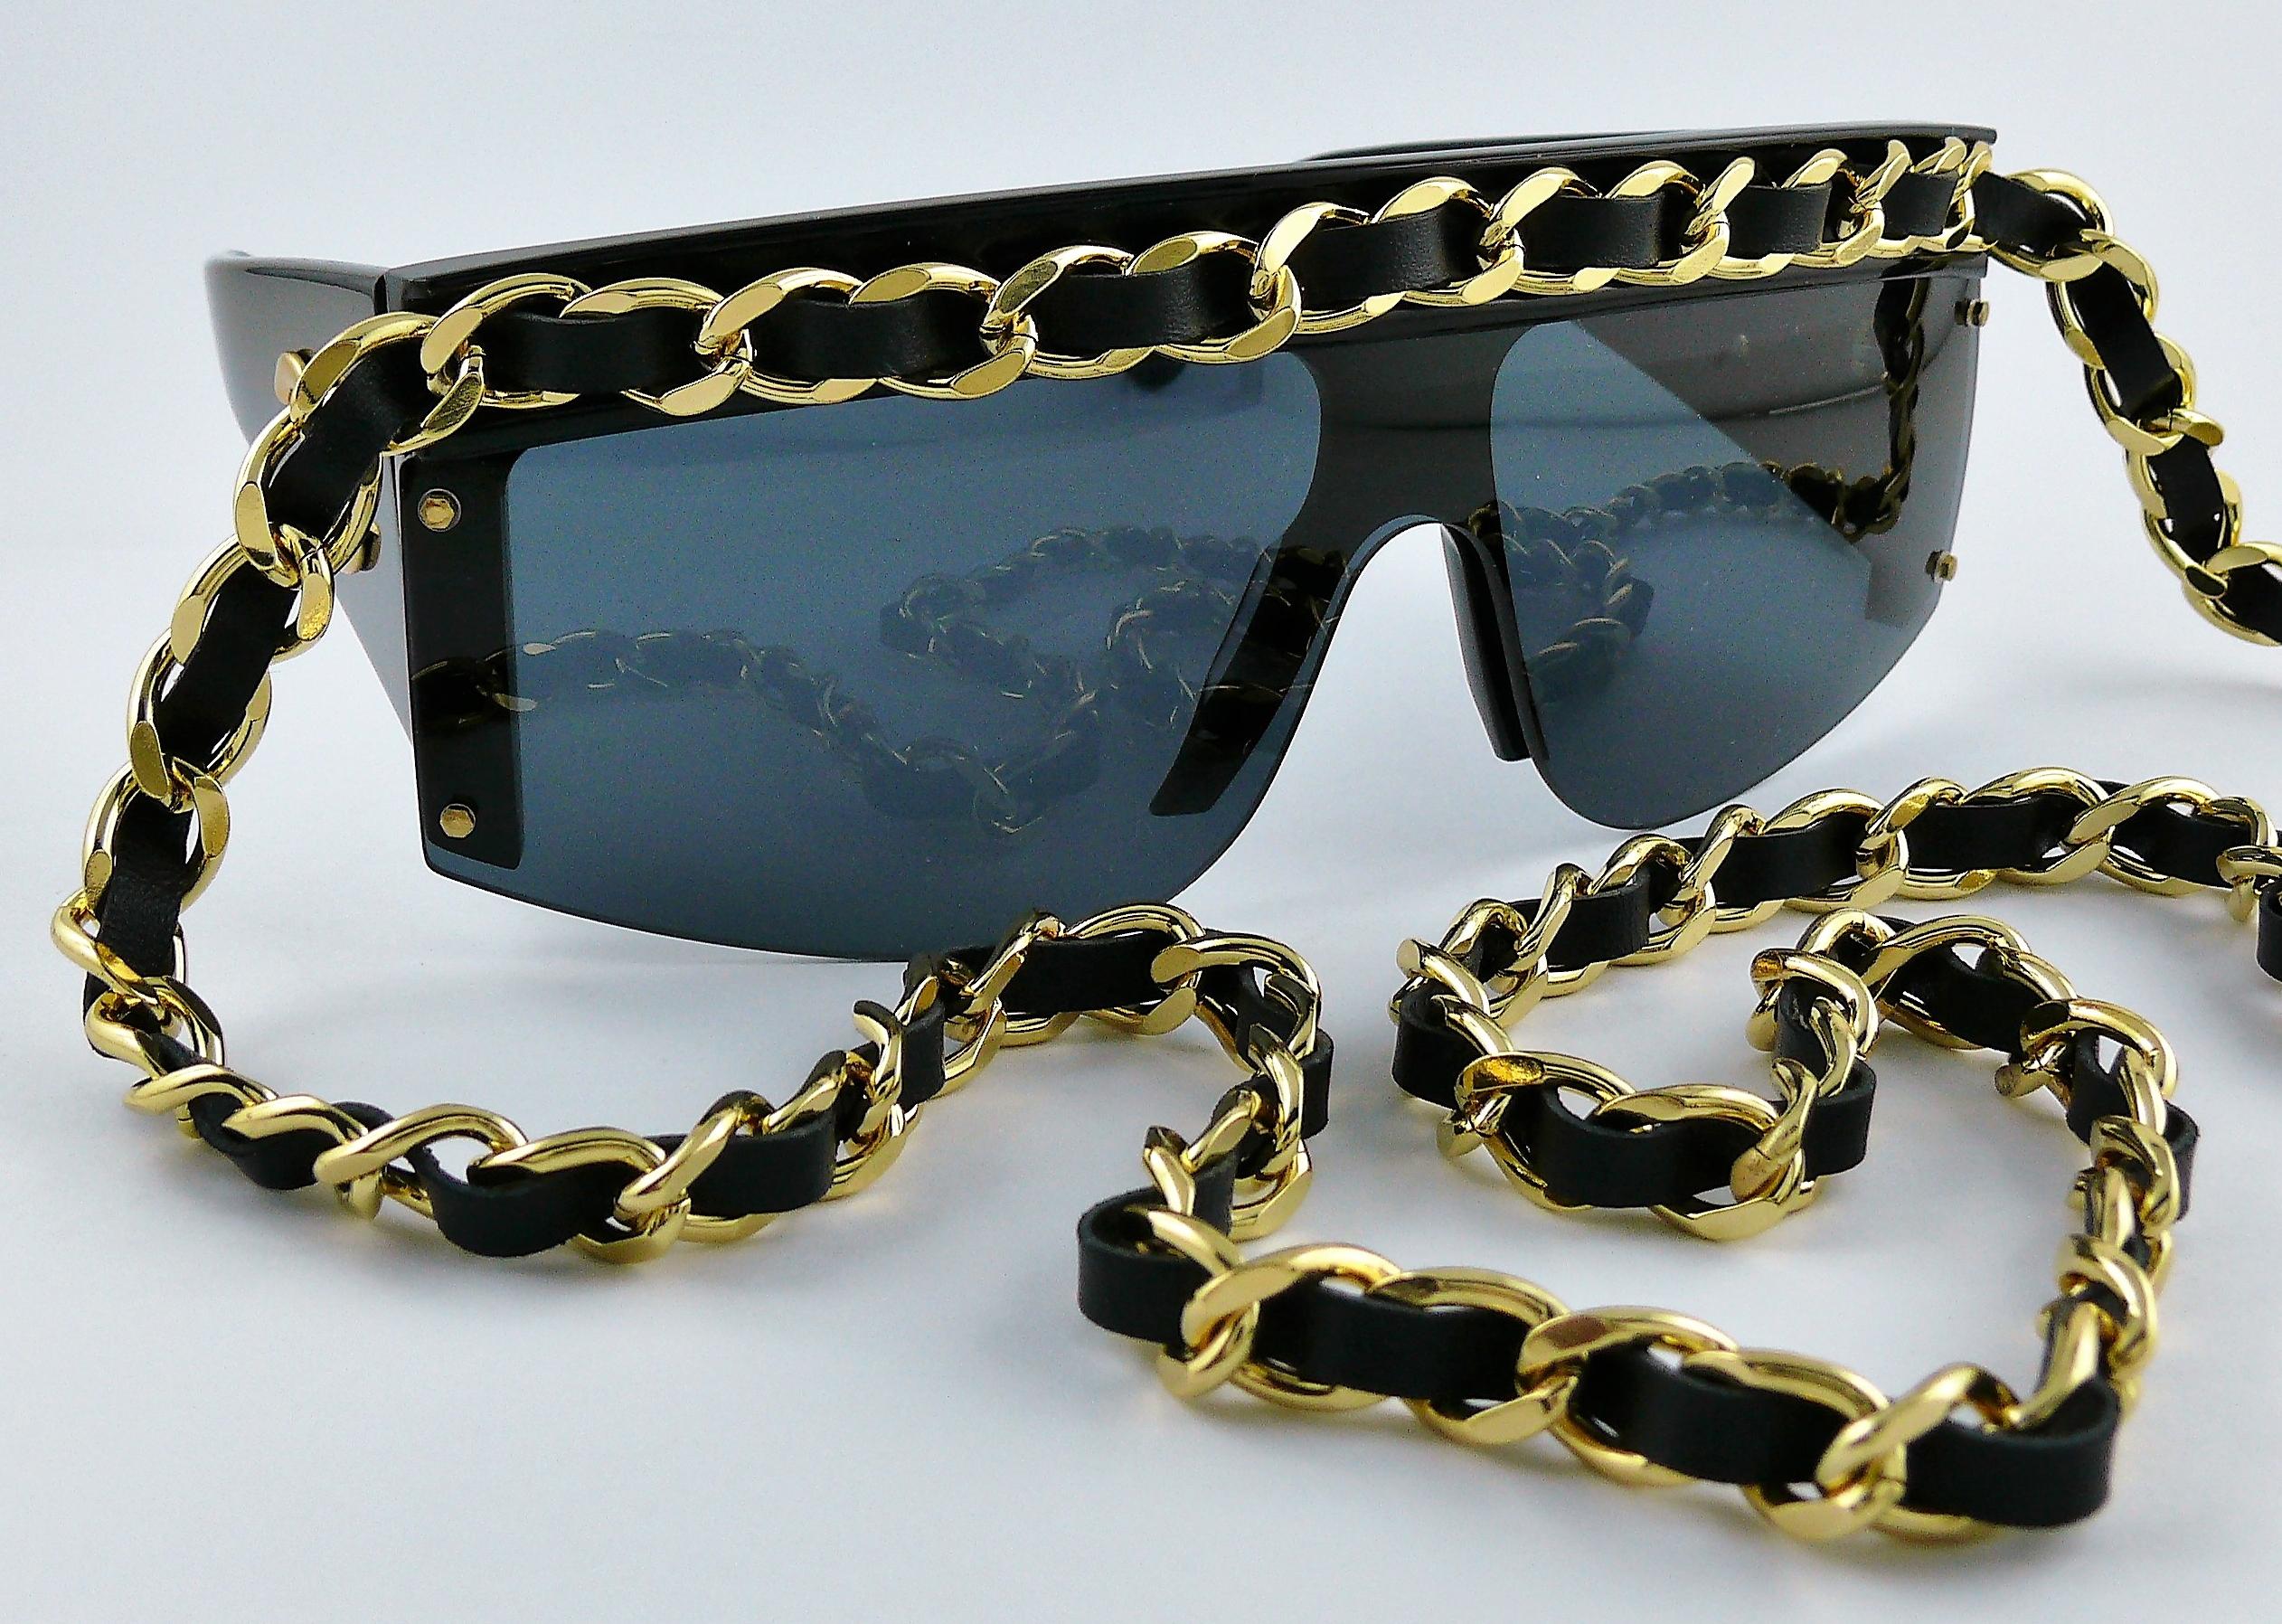 Black Chanel Vintage Fall Winter 1992 Iconic Runway Logo Leather Chain Drop Sunglasses